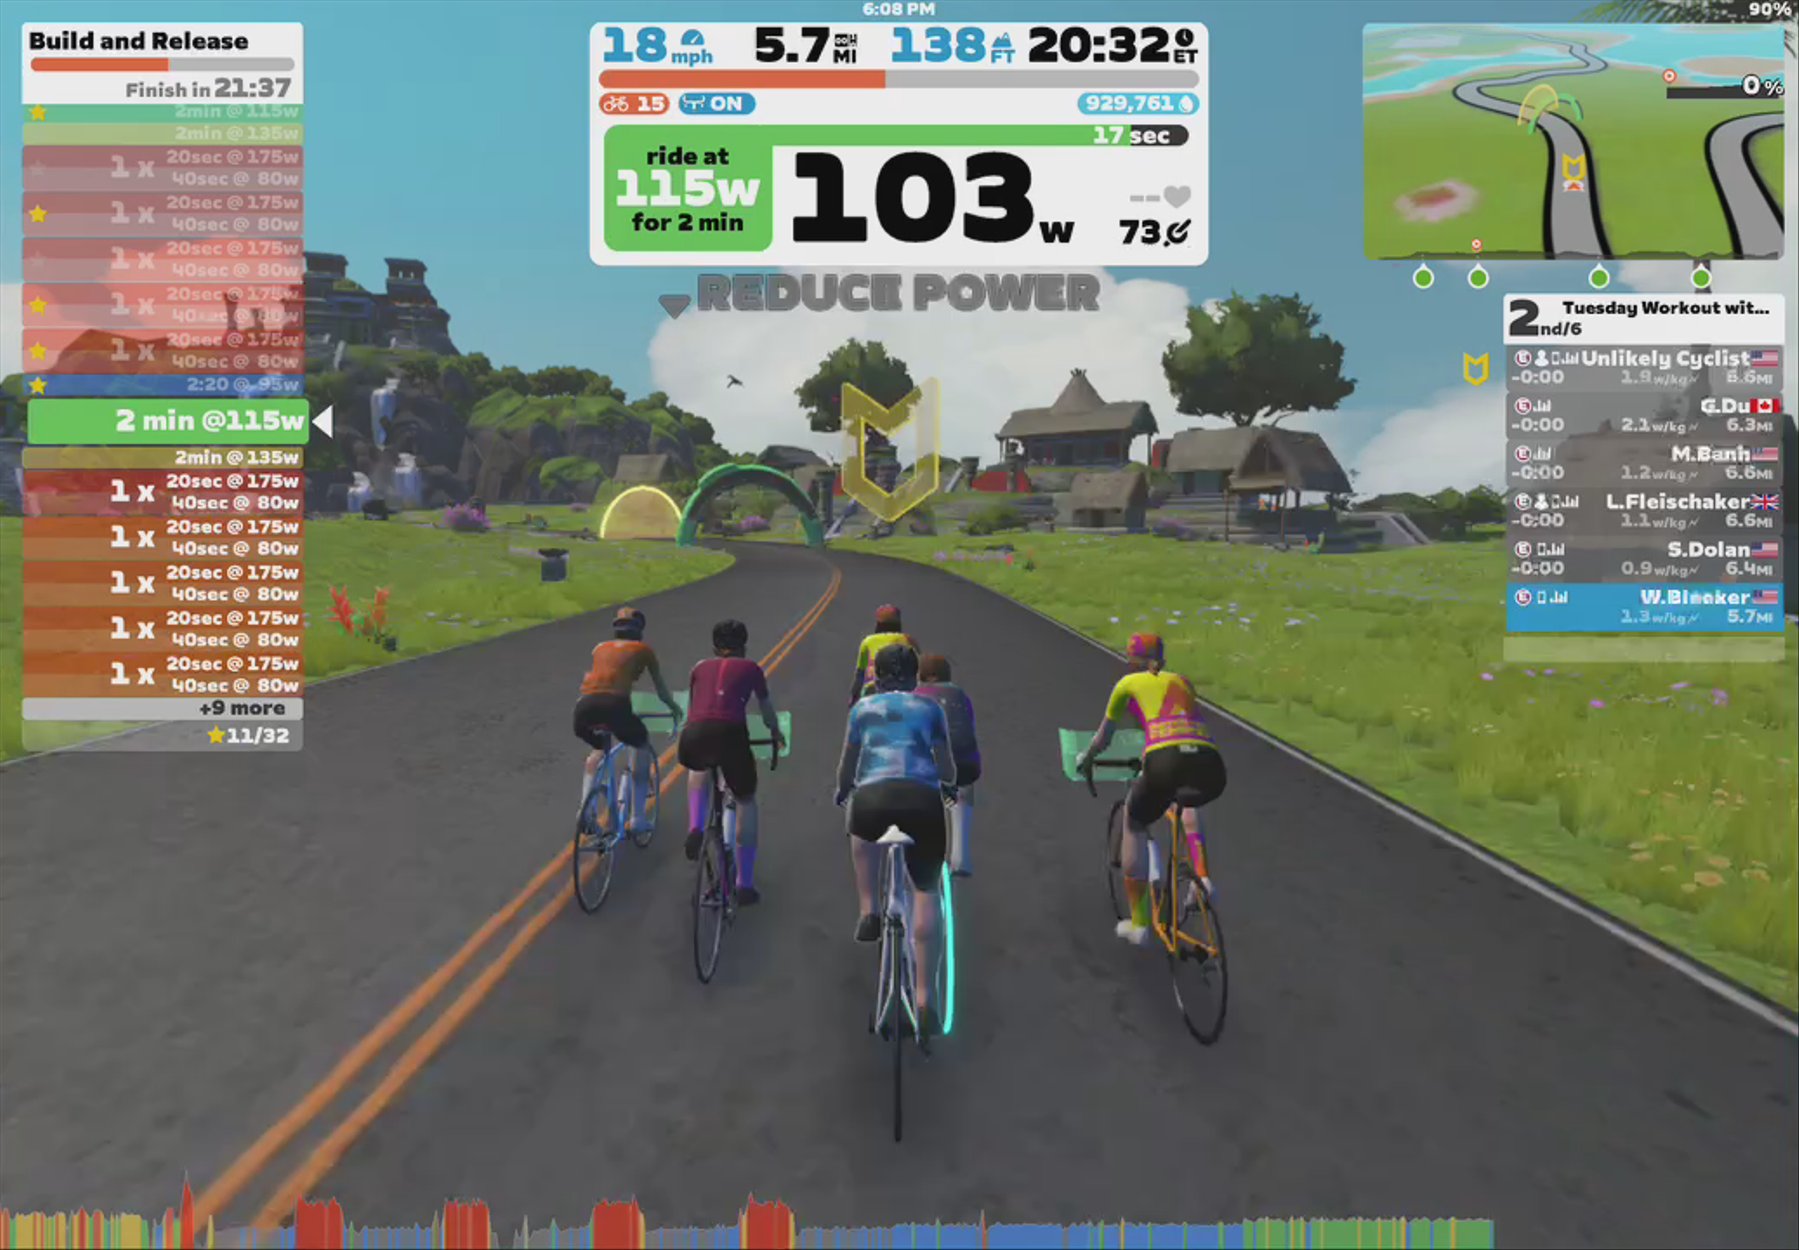 Zwift - Group Workout: Tuesday Workout with TUC on Temple Trek in Watopia